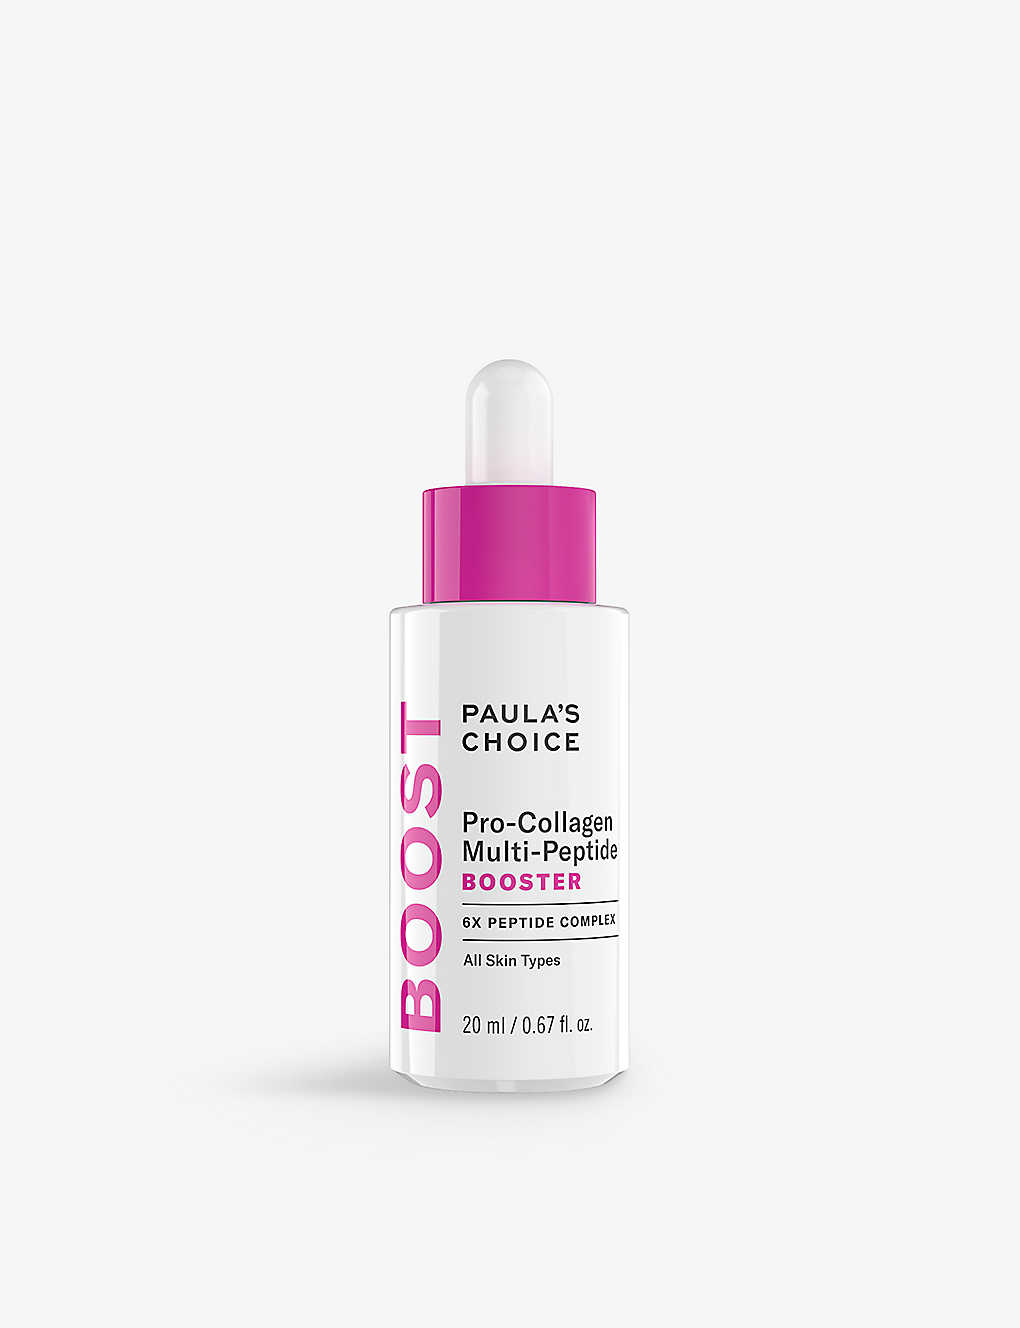 PAULA'S CHOICE PRO-COLLAGEN -PEPTIDE BOOSTER,68343645